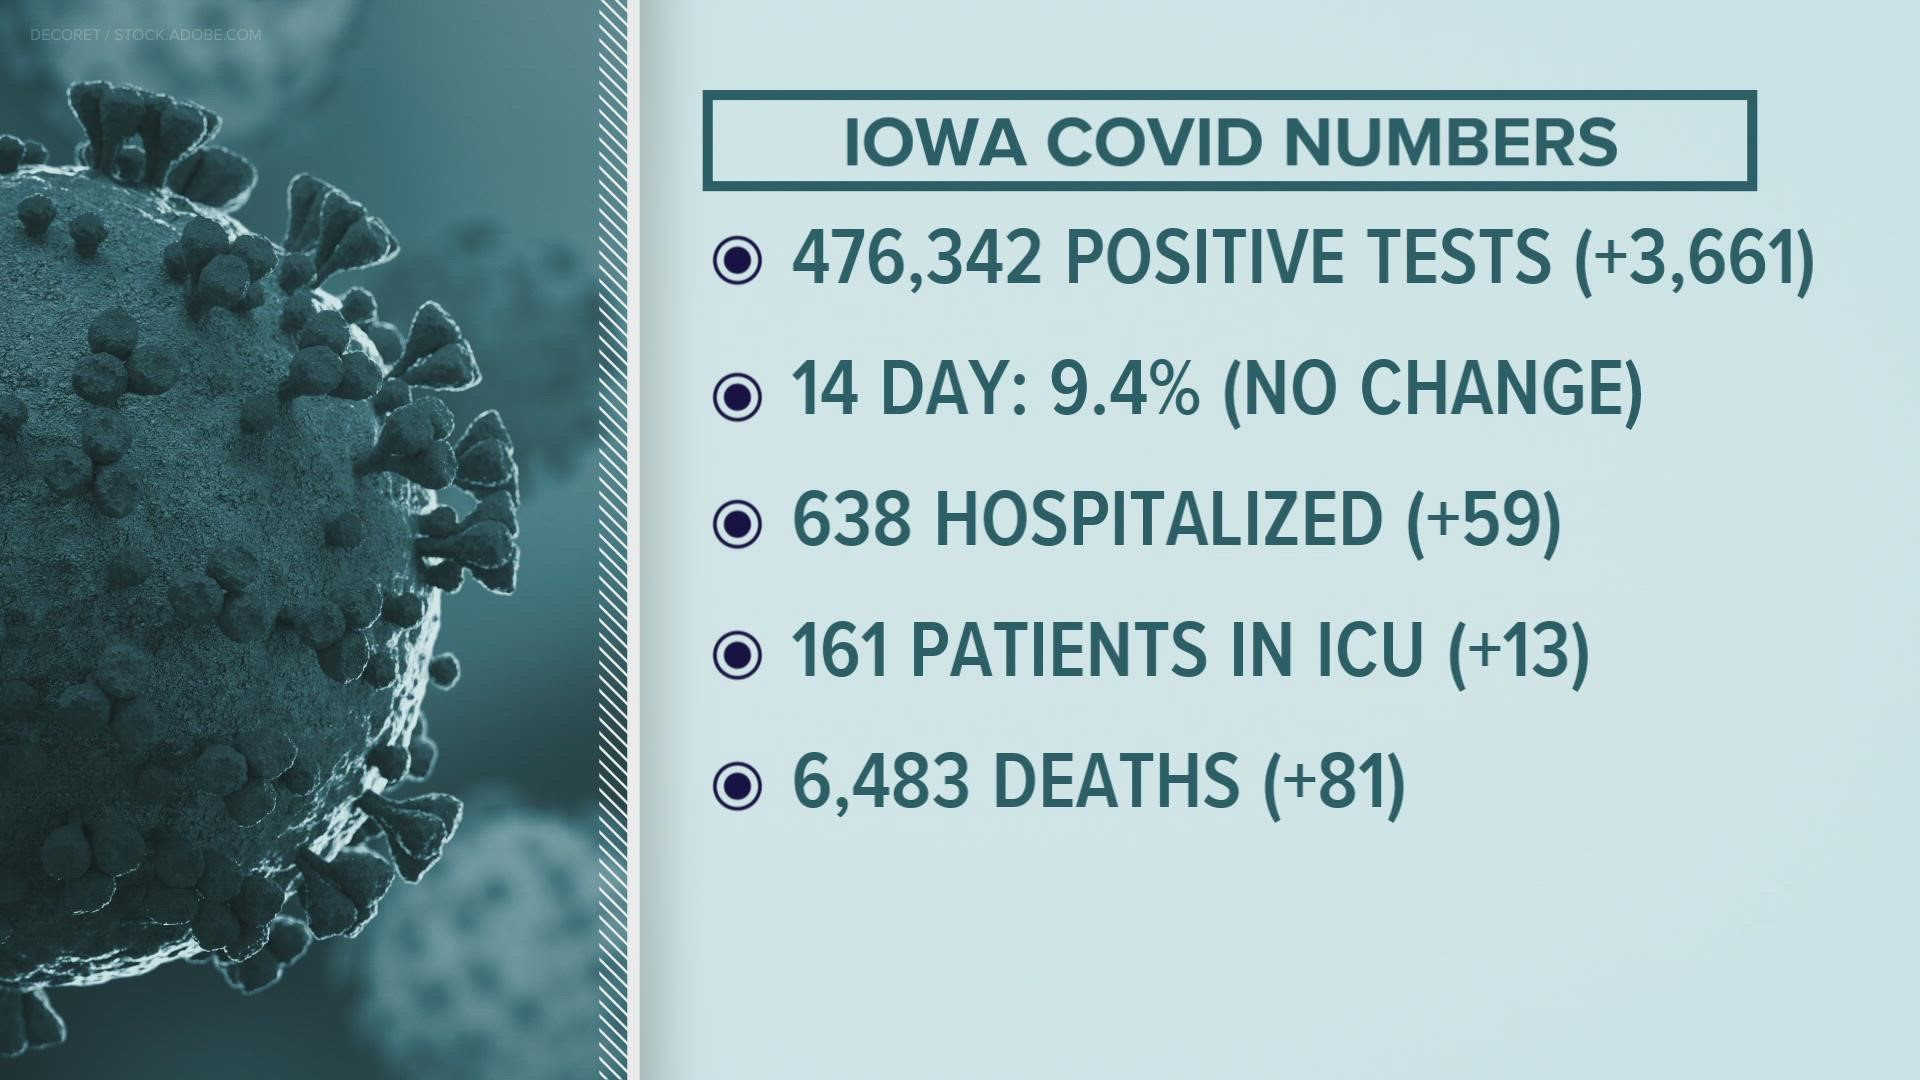 The Iowa Department of Public Health updates some core metrics on Monday, Wednesday and Friday. But individuals positive can only be calculated on Wednesday.